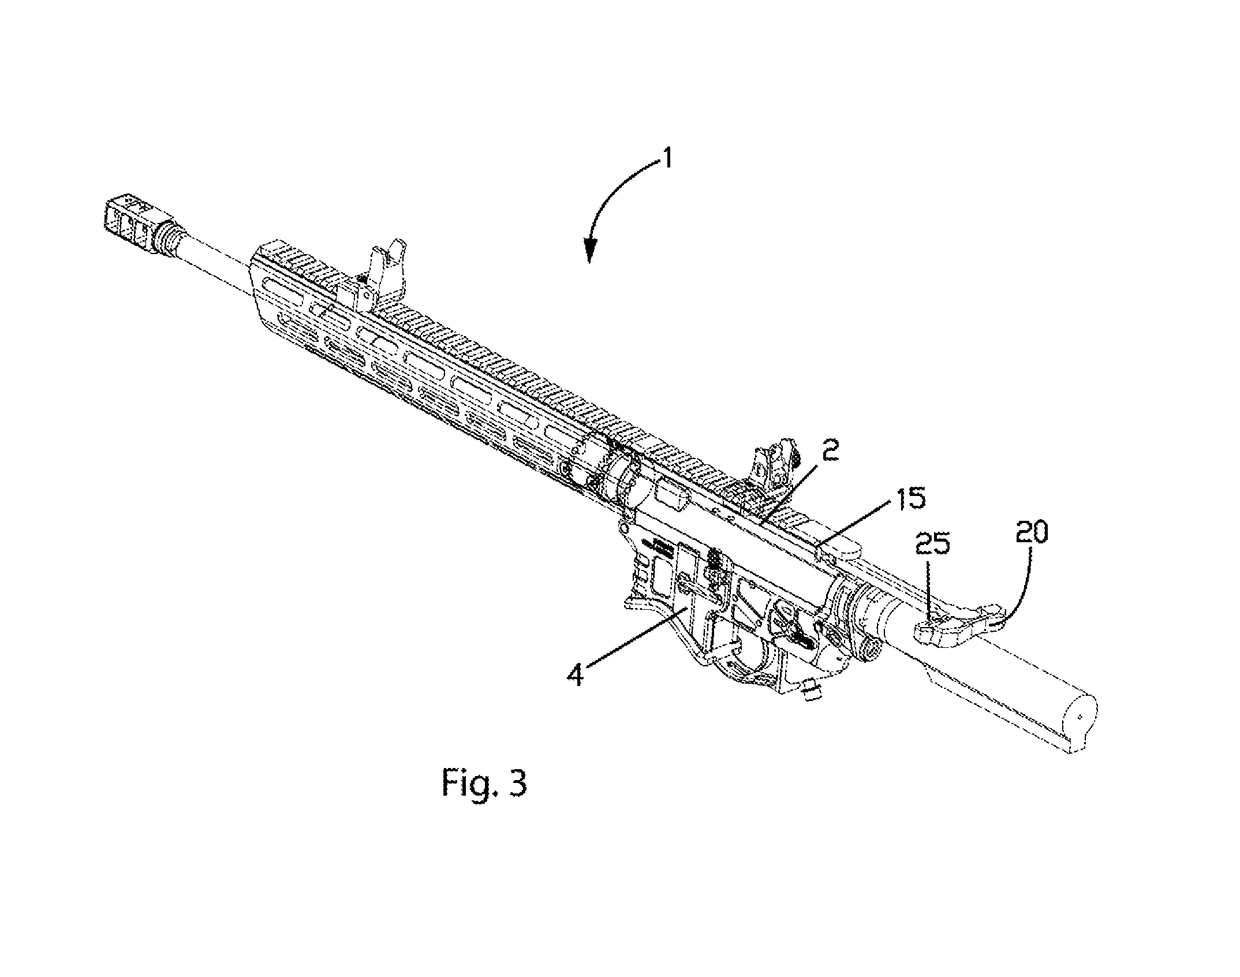 Latched charging handle with mechanical advantage separator